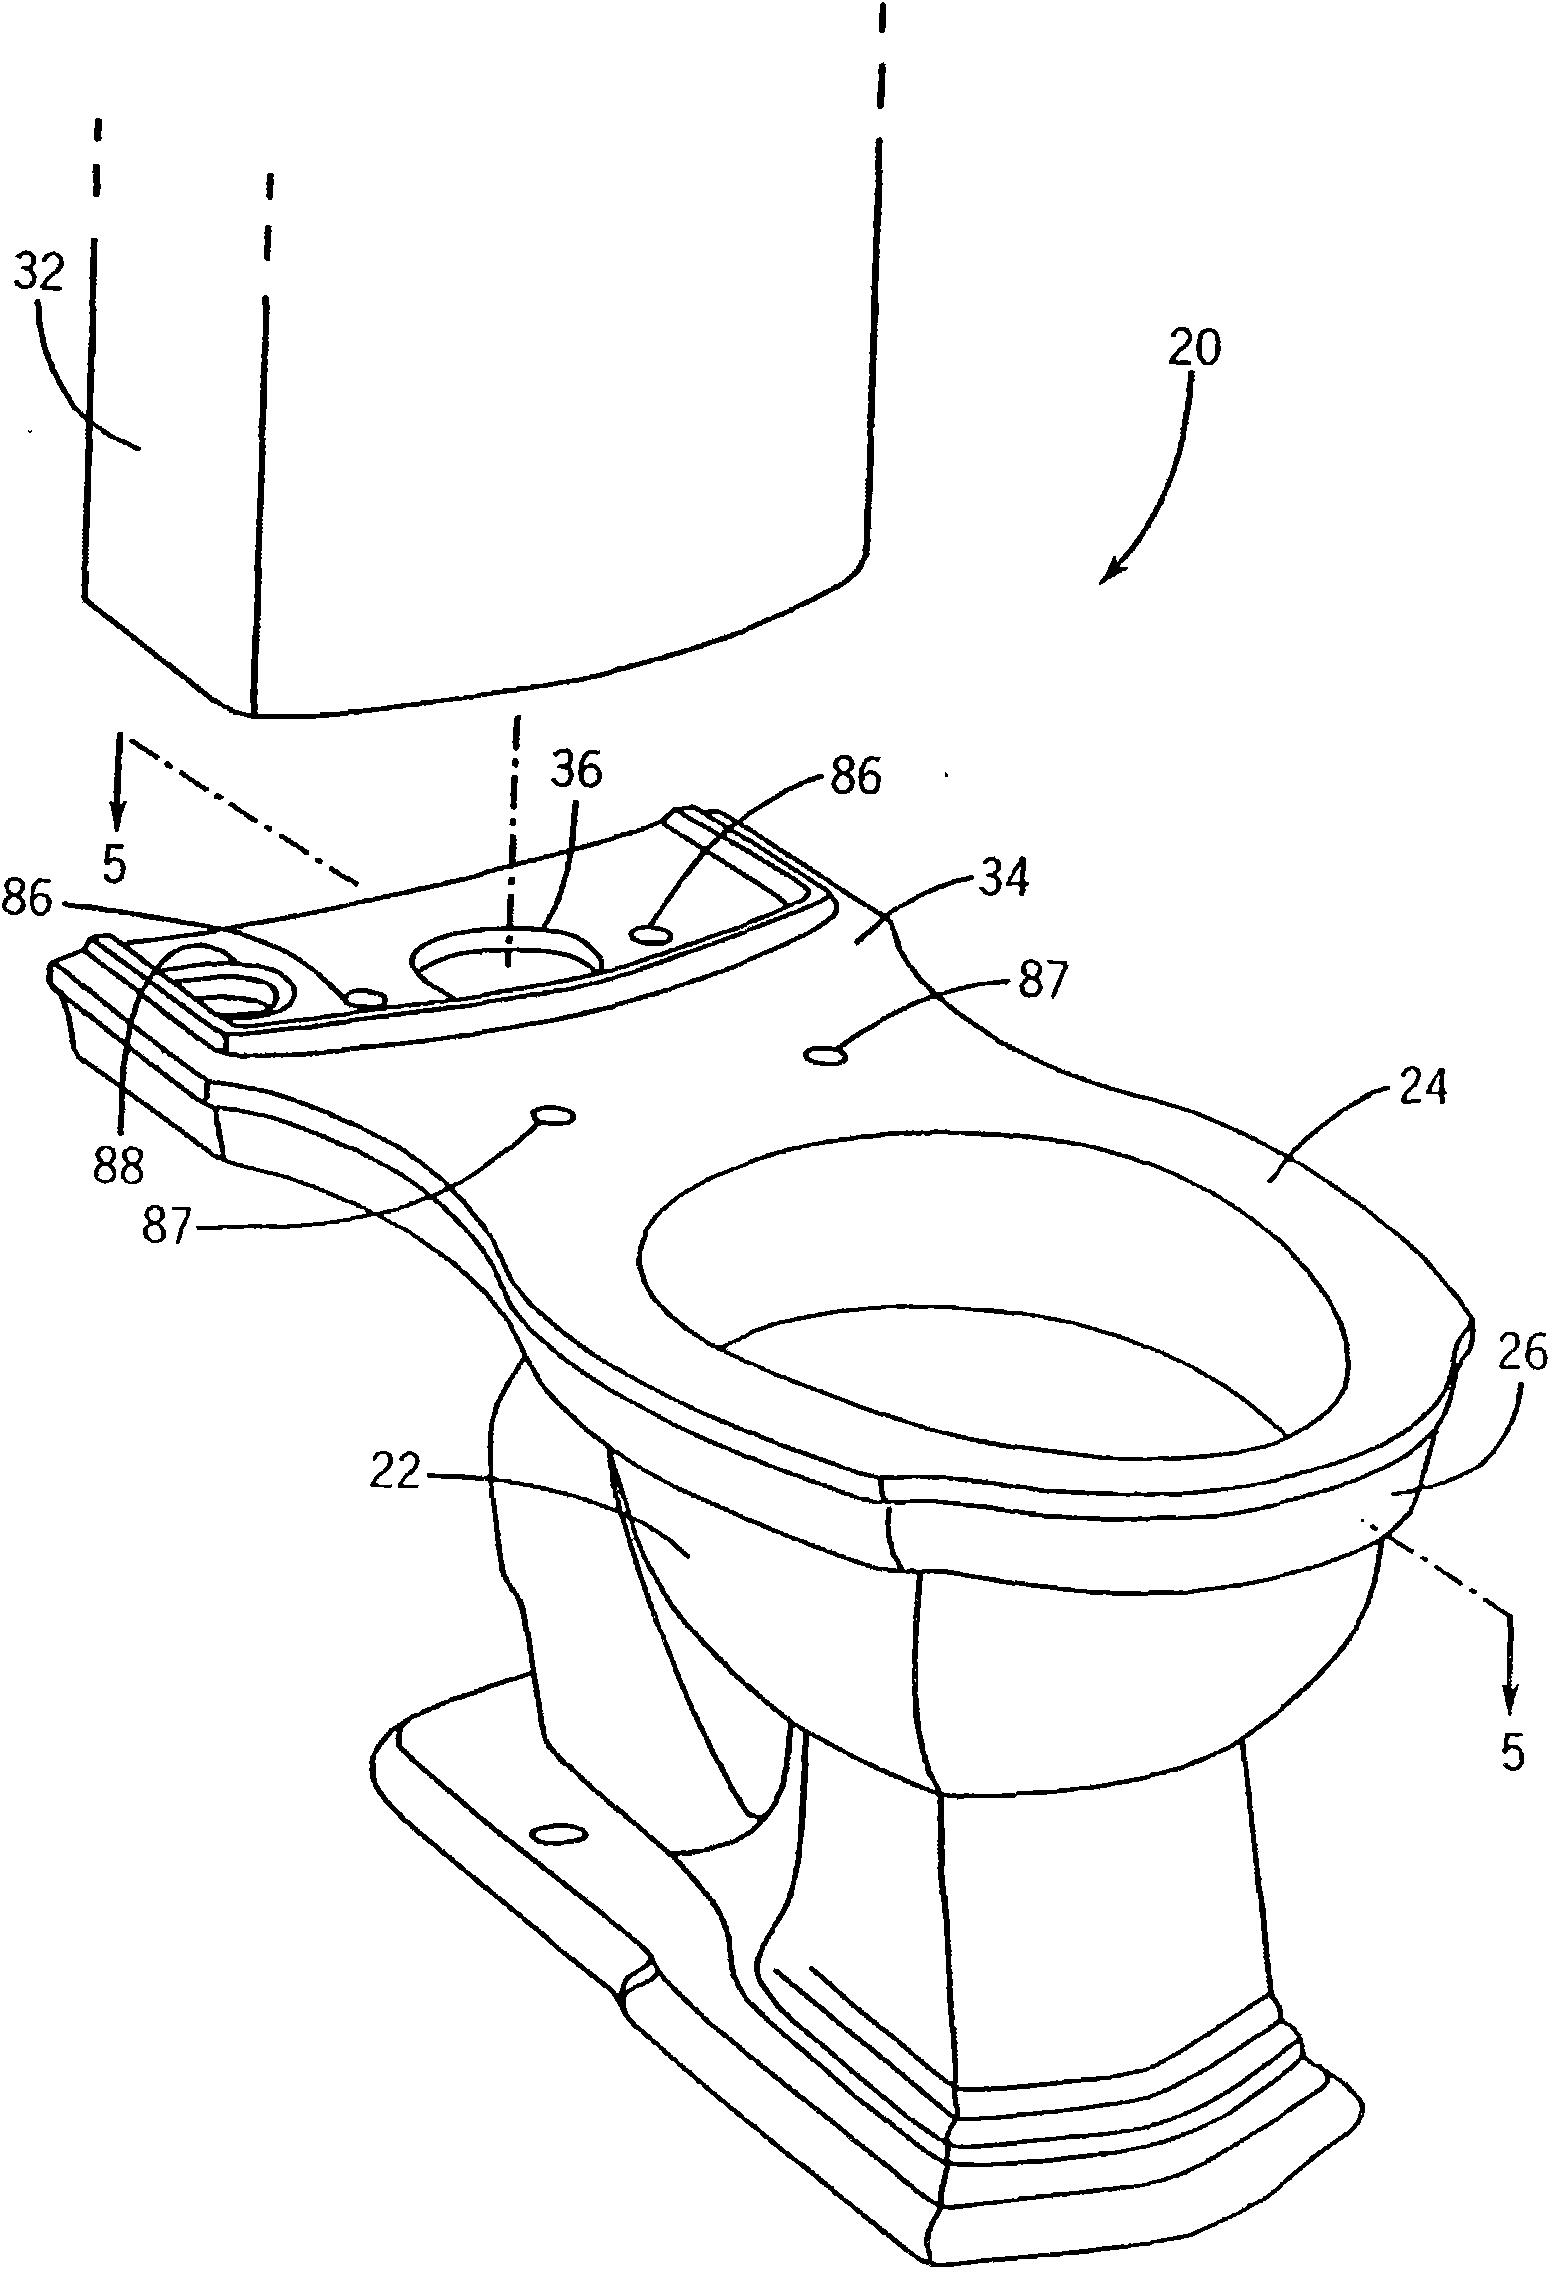 Toilet with reduced water usage